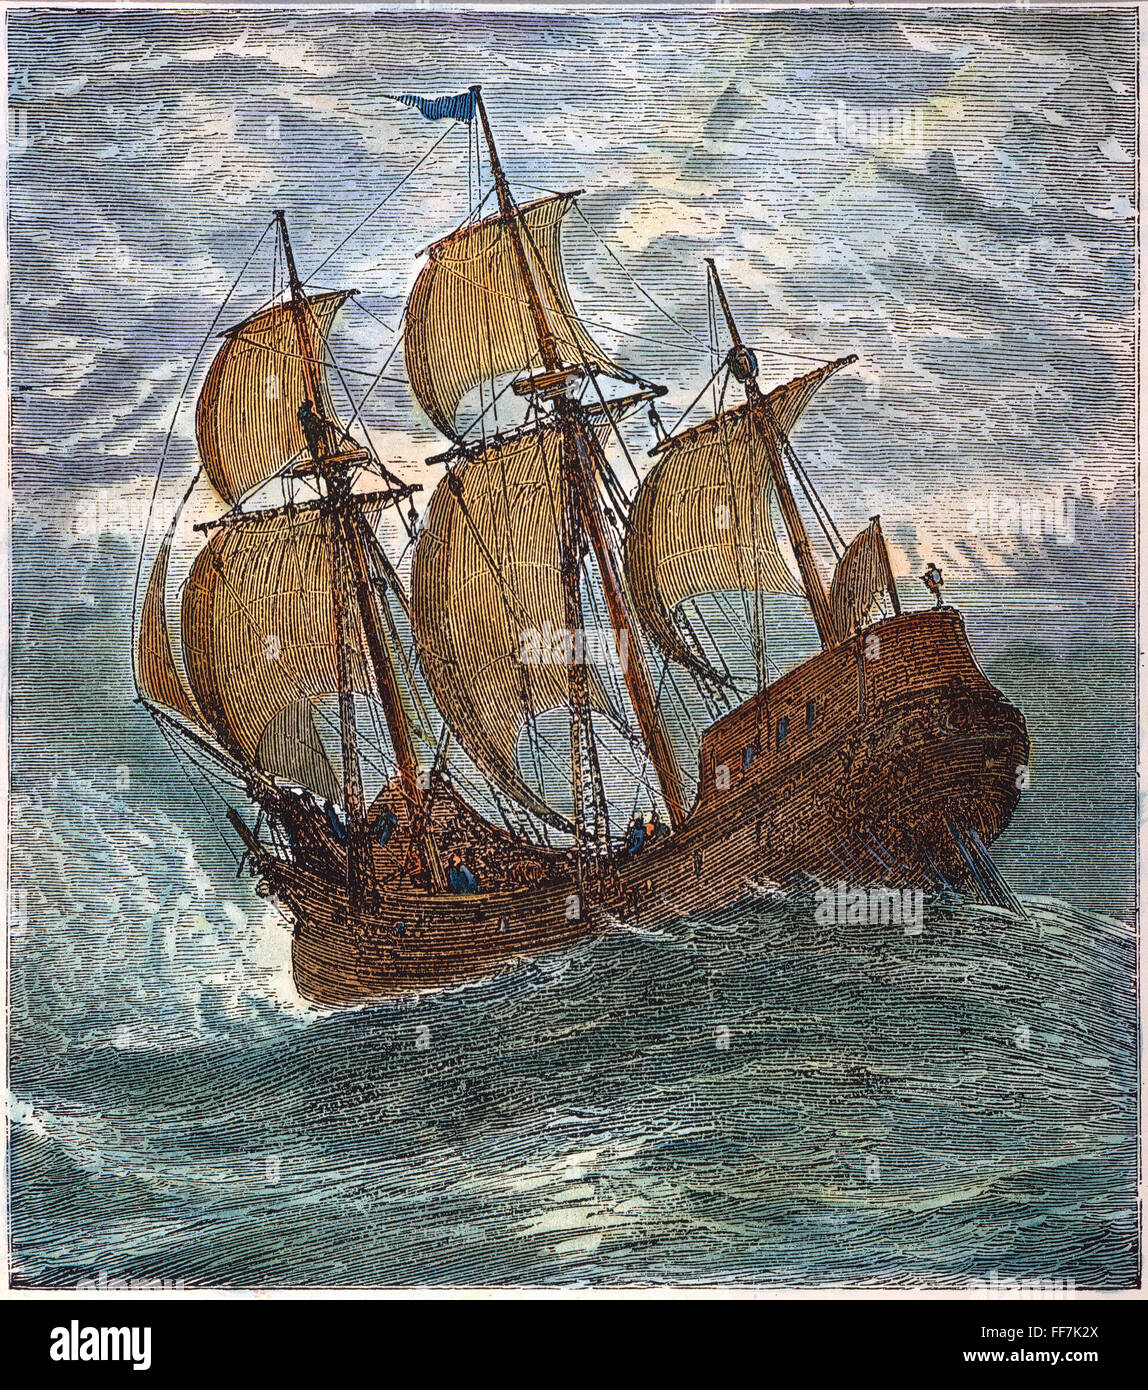 MAYFLOWER AT SEA, 1620. /nThe Mayflower at sea during the Pilgrims' voyage to America. Wood engraving, American, late 19th century. Stock Photo